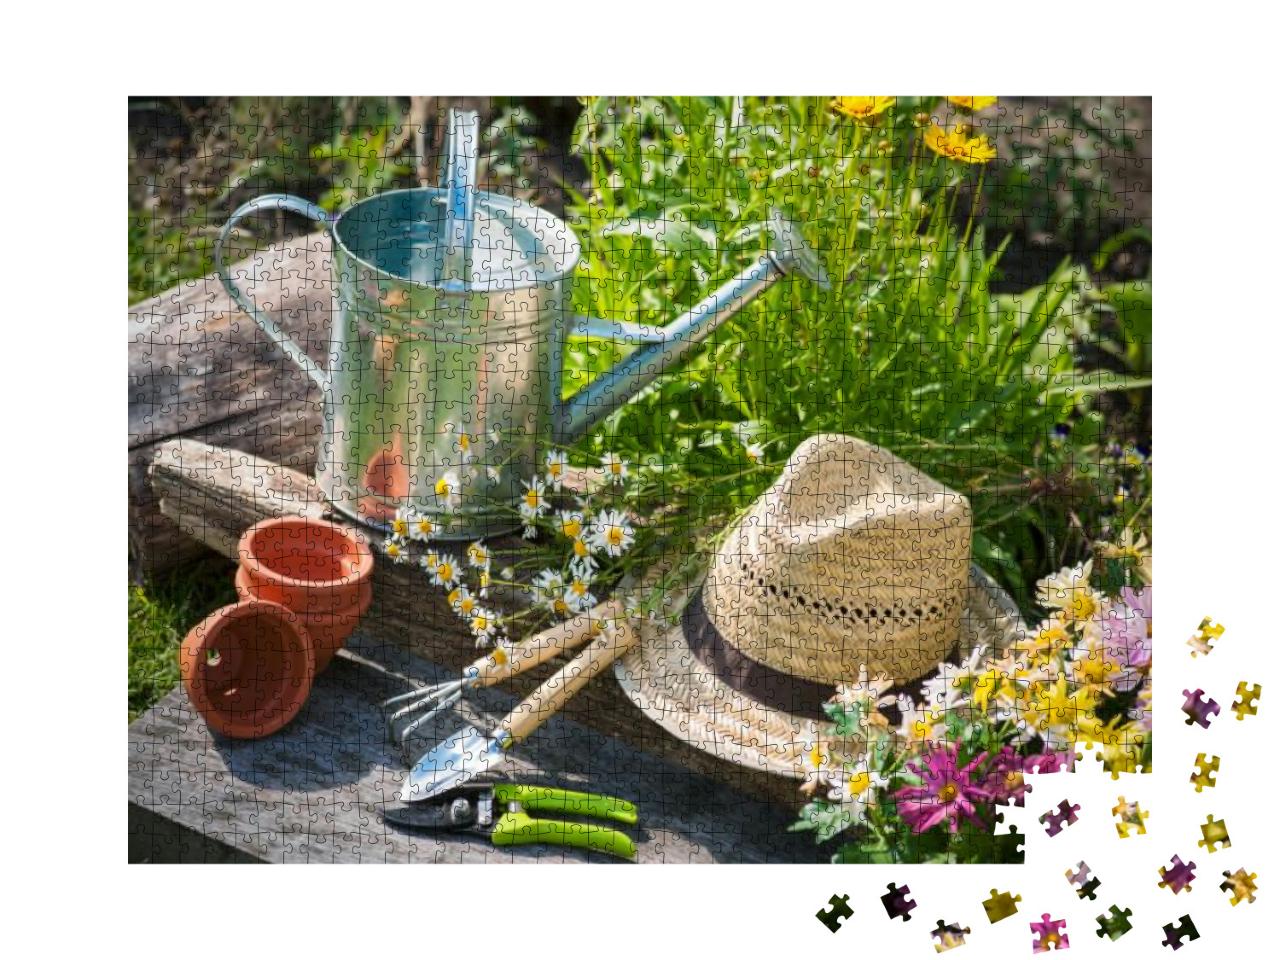 Gardening Tools & a Straw Hat on the Grass in the Garden... Jigsaw Puzzle with 1000 pieces